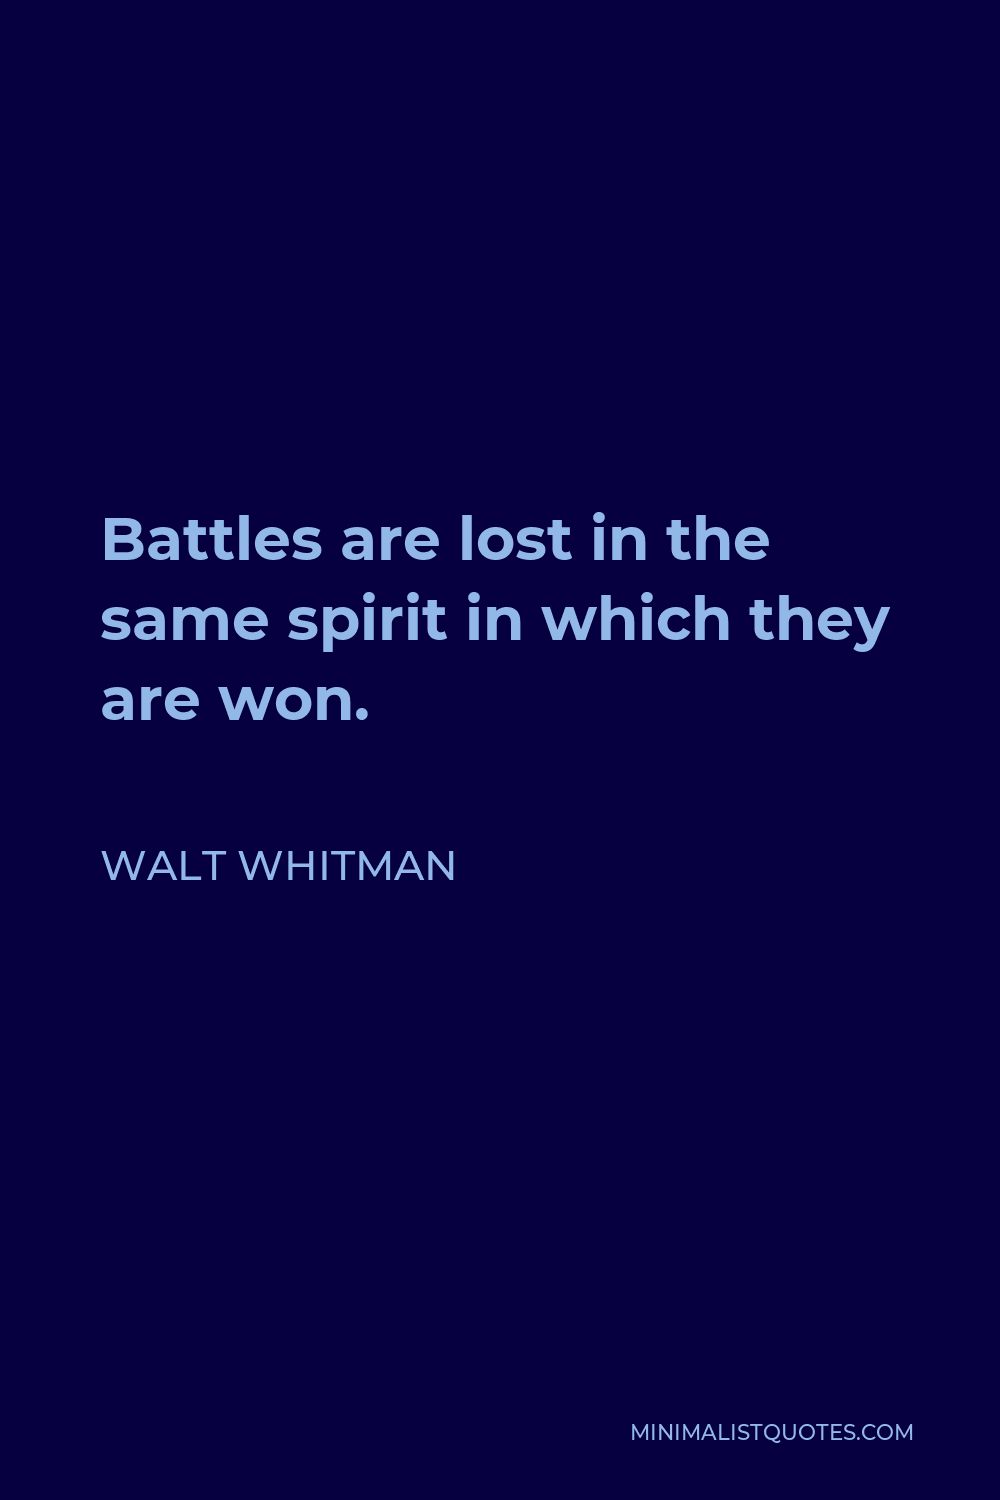 Walt Whitman Quote - Battles are lost in the same spirit in which they are won.